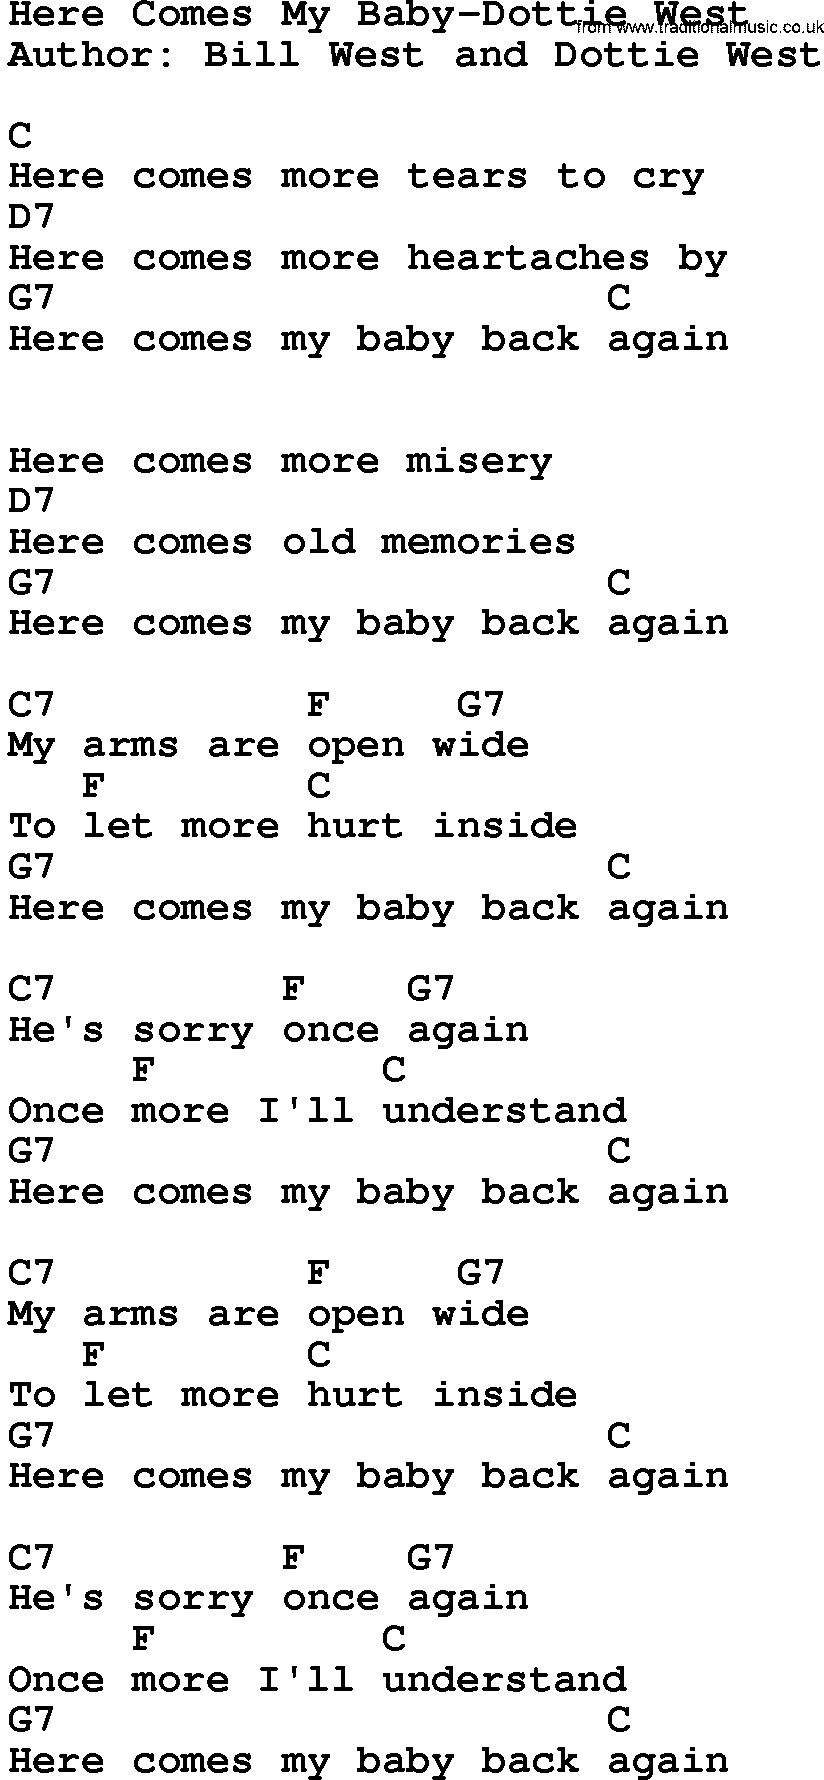 Country music song: Here Comes My Baby-Dottie West lyrics and chords